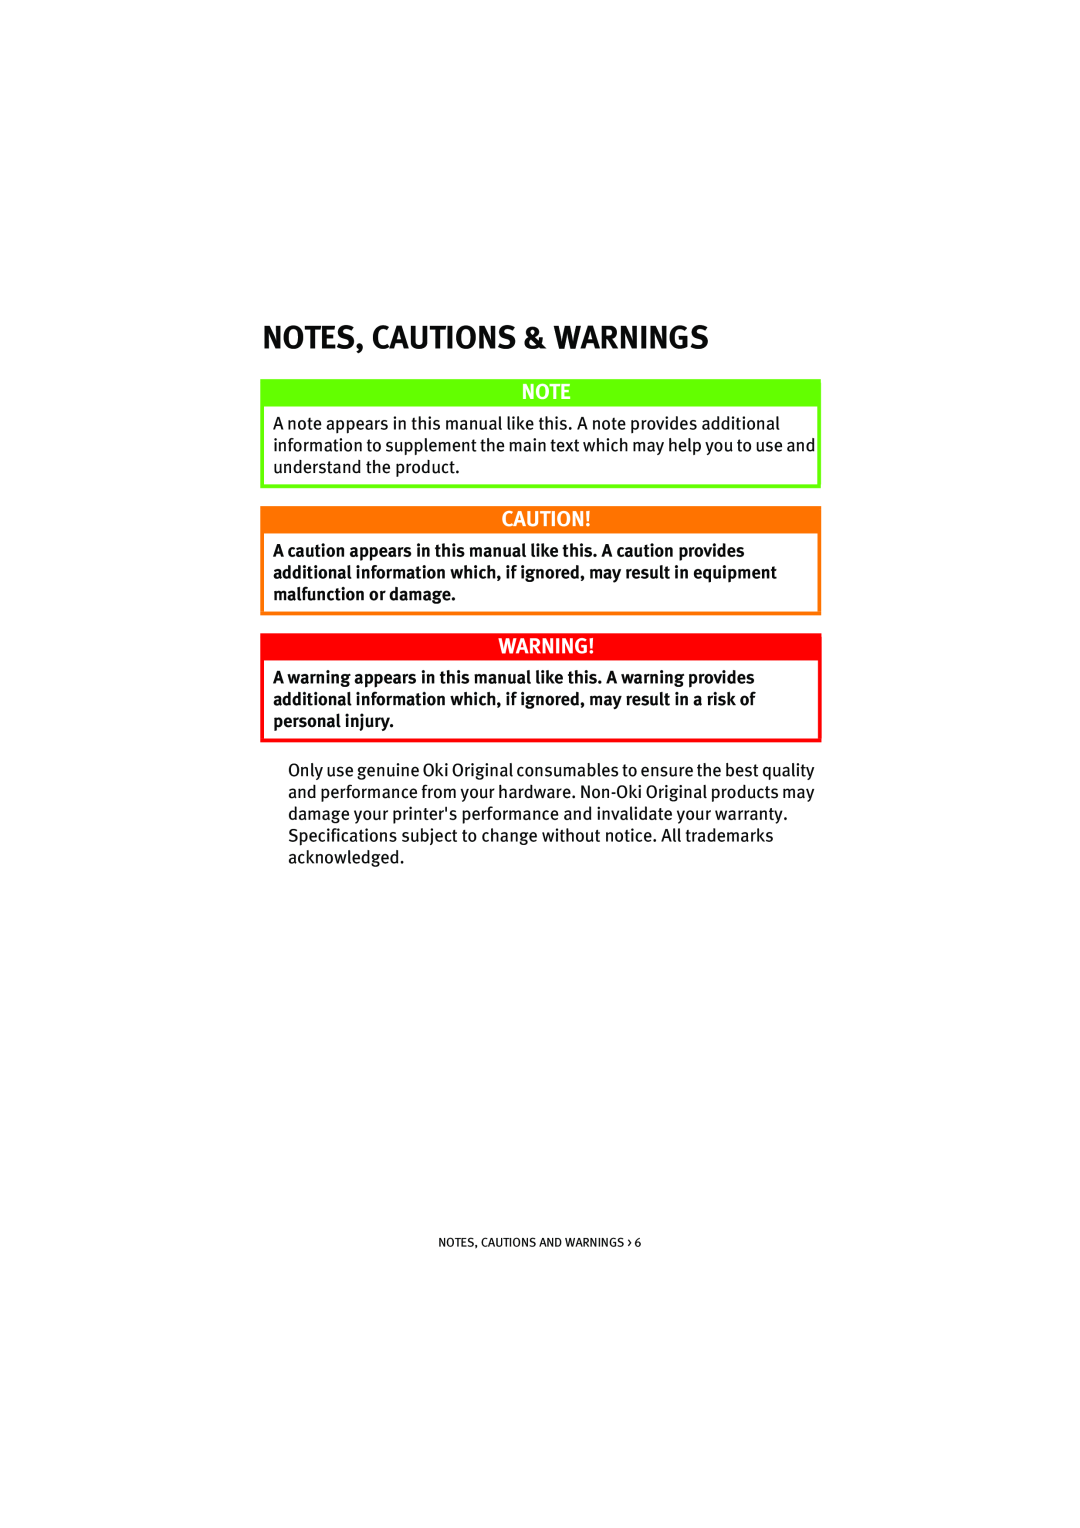 Oki S900 manual Notes, Cautions & Warnings, Notes, Cautions And Warnings 